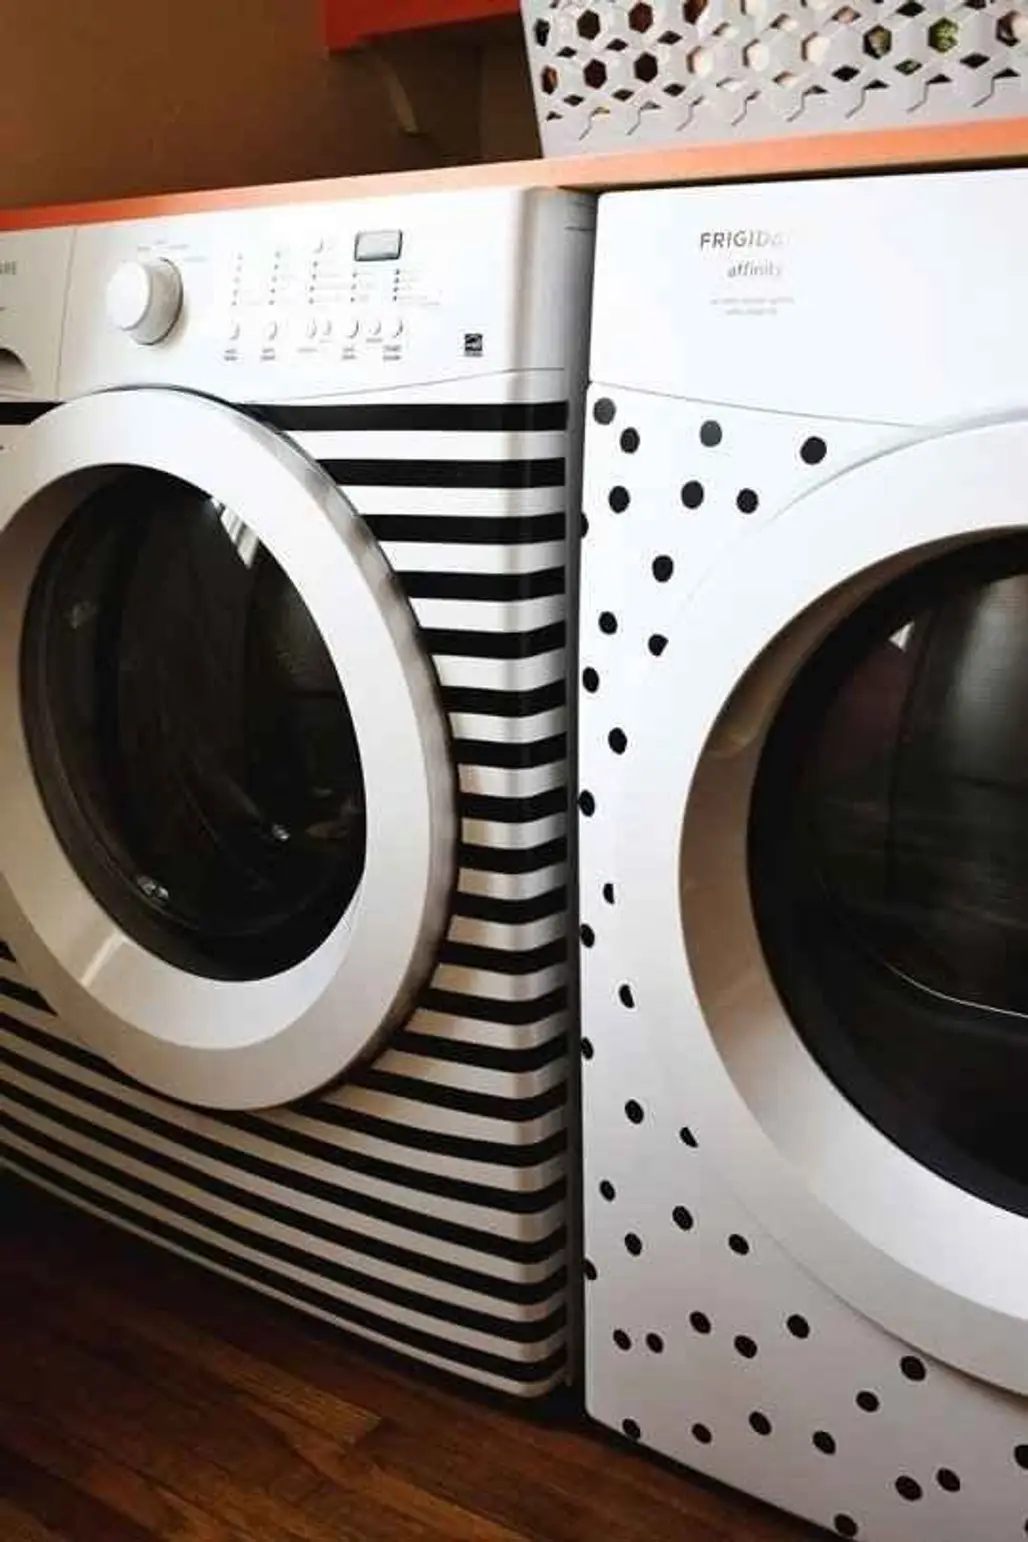 Taped Washer and Dryer